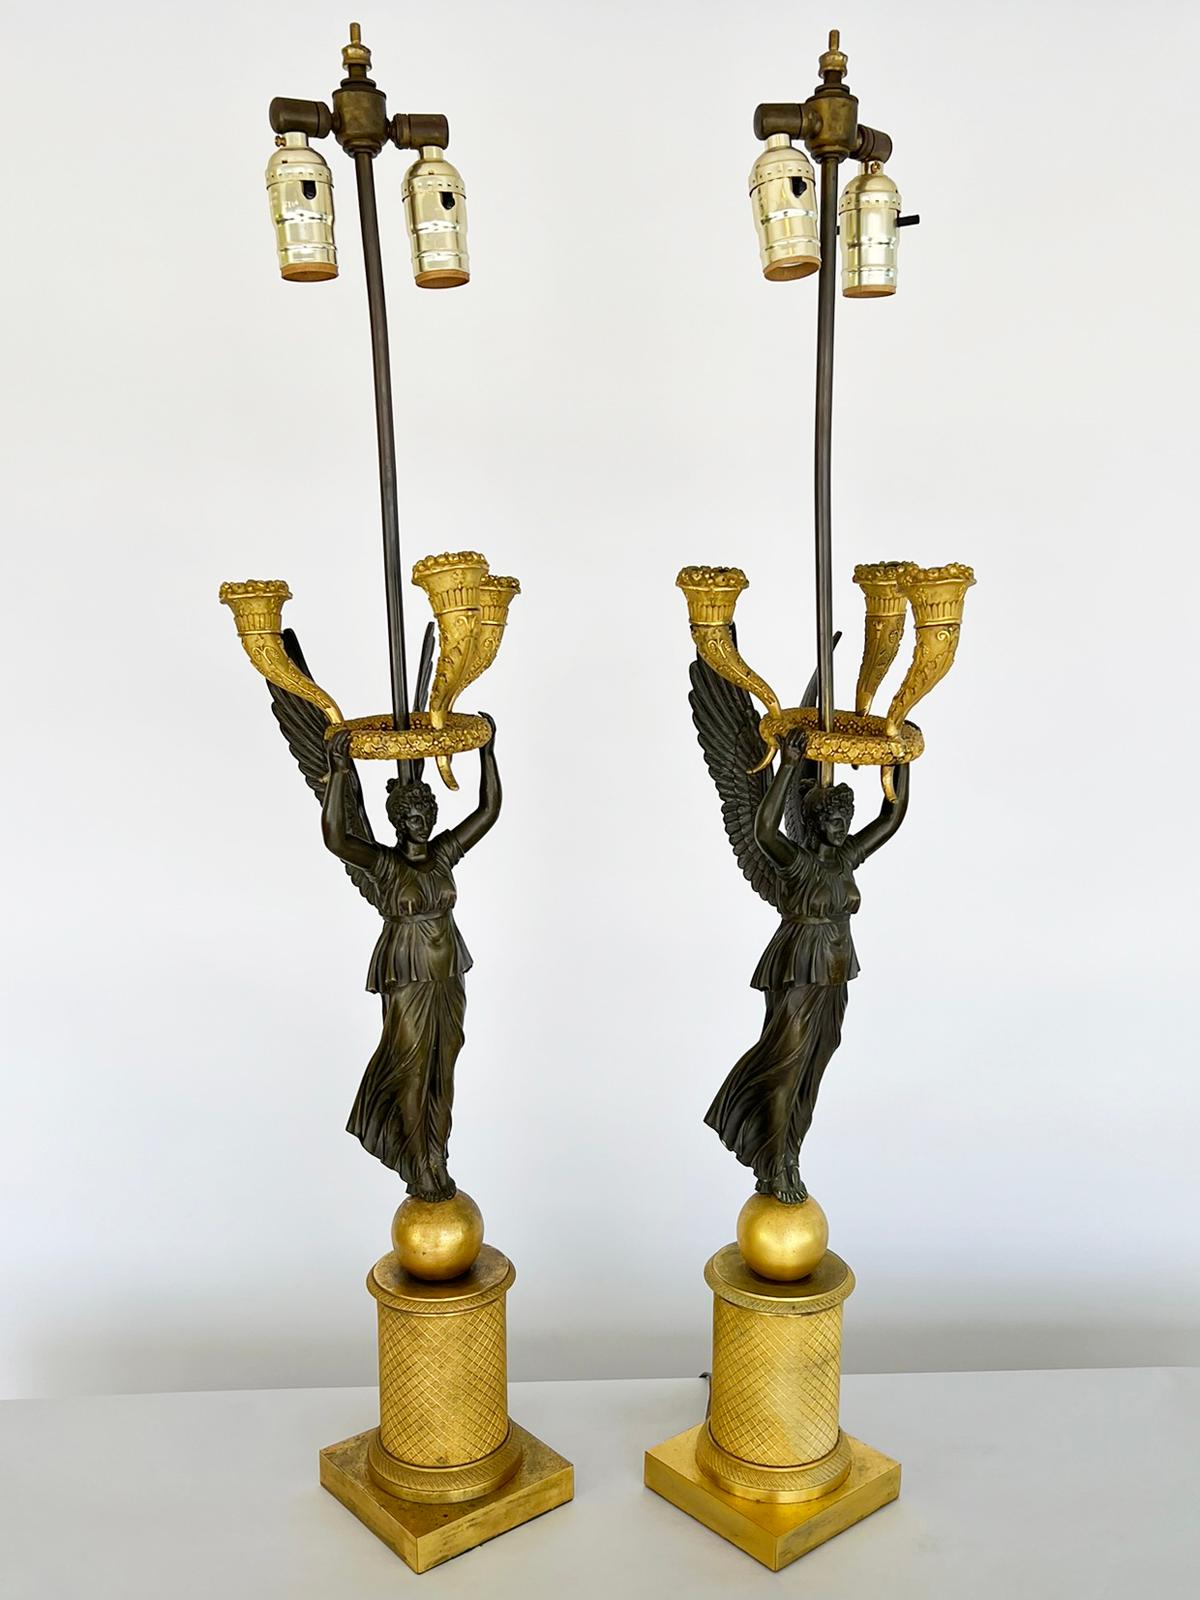 Pair of period Empire figural candelabrum. Each modeled as a winged figure of Victory, of patented bronze, with both arms supporting a floral wreath, and three horns-of-plenty, of ormolu. Each caryatid stands upon a sphere atop a square plinth,